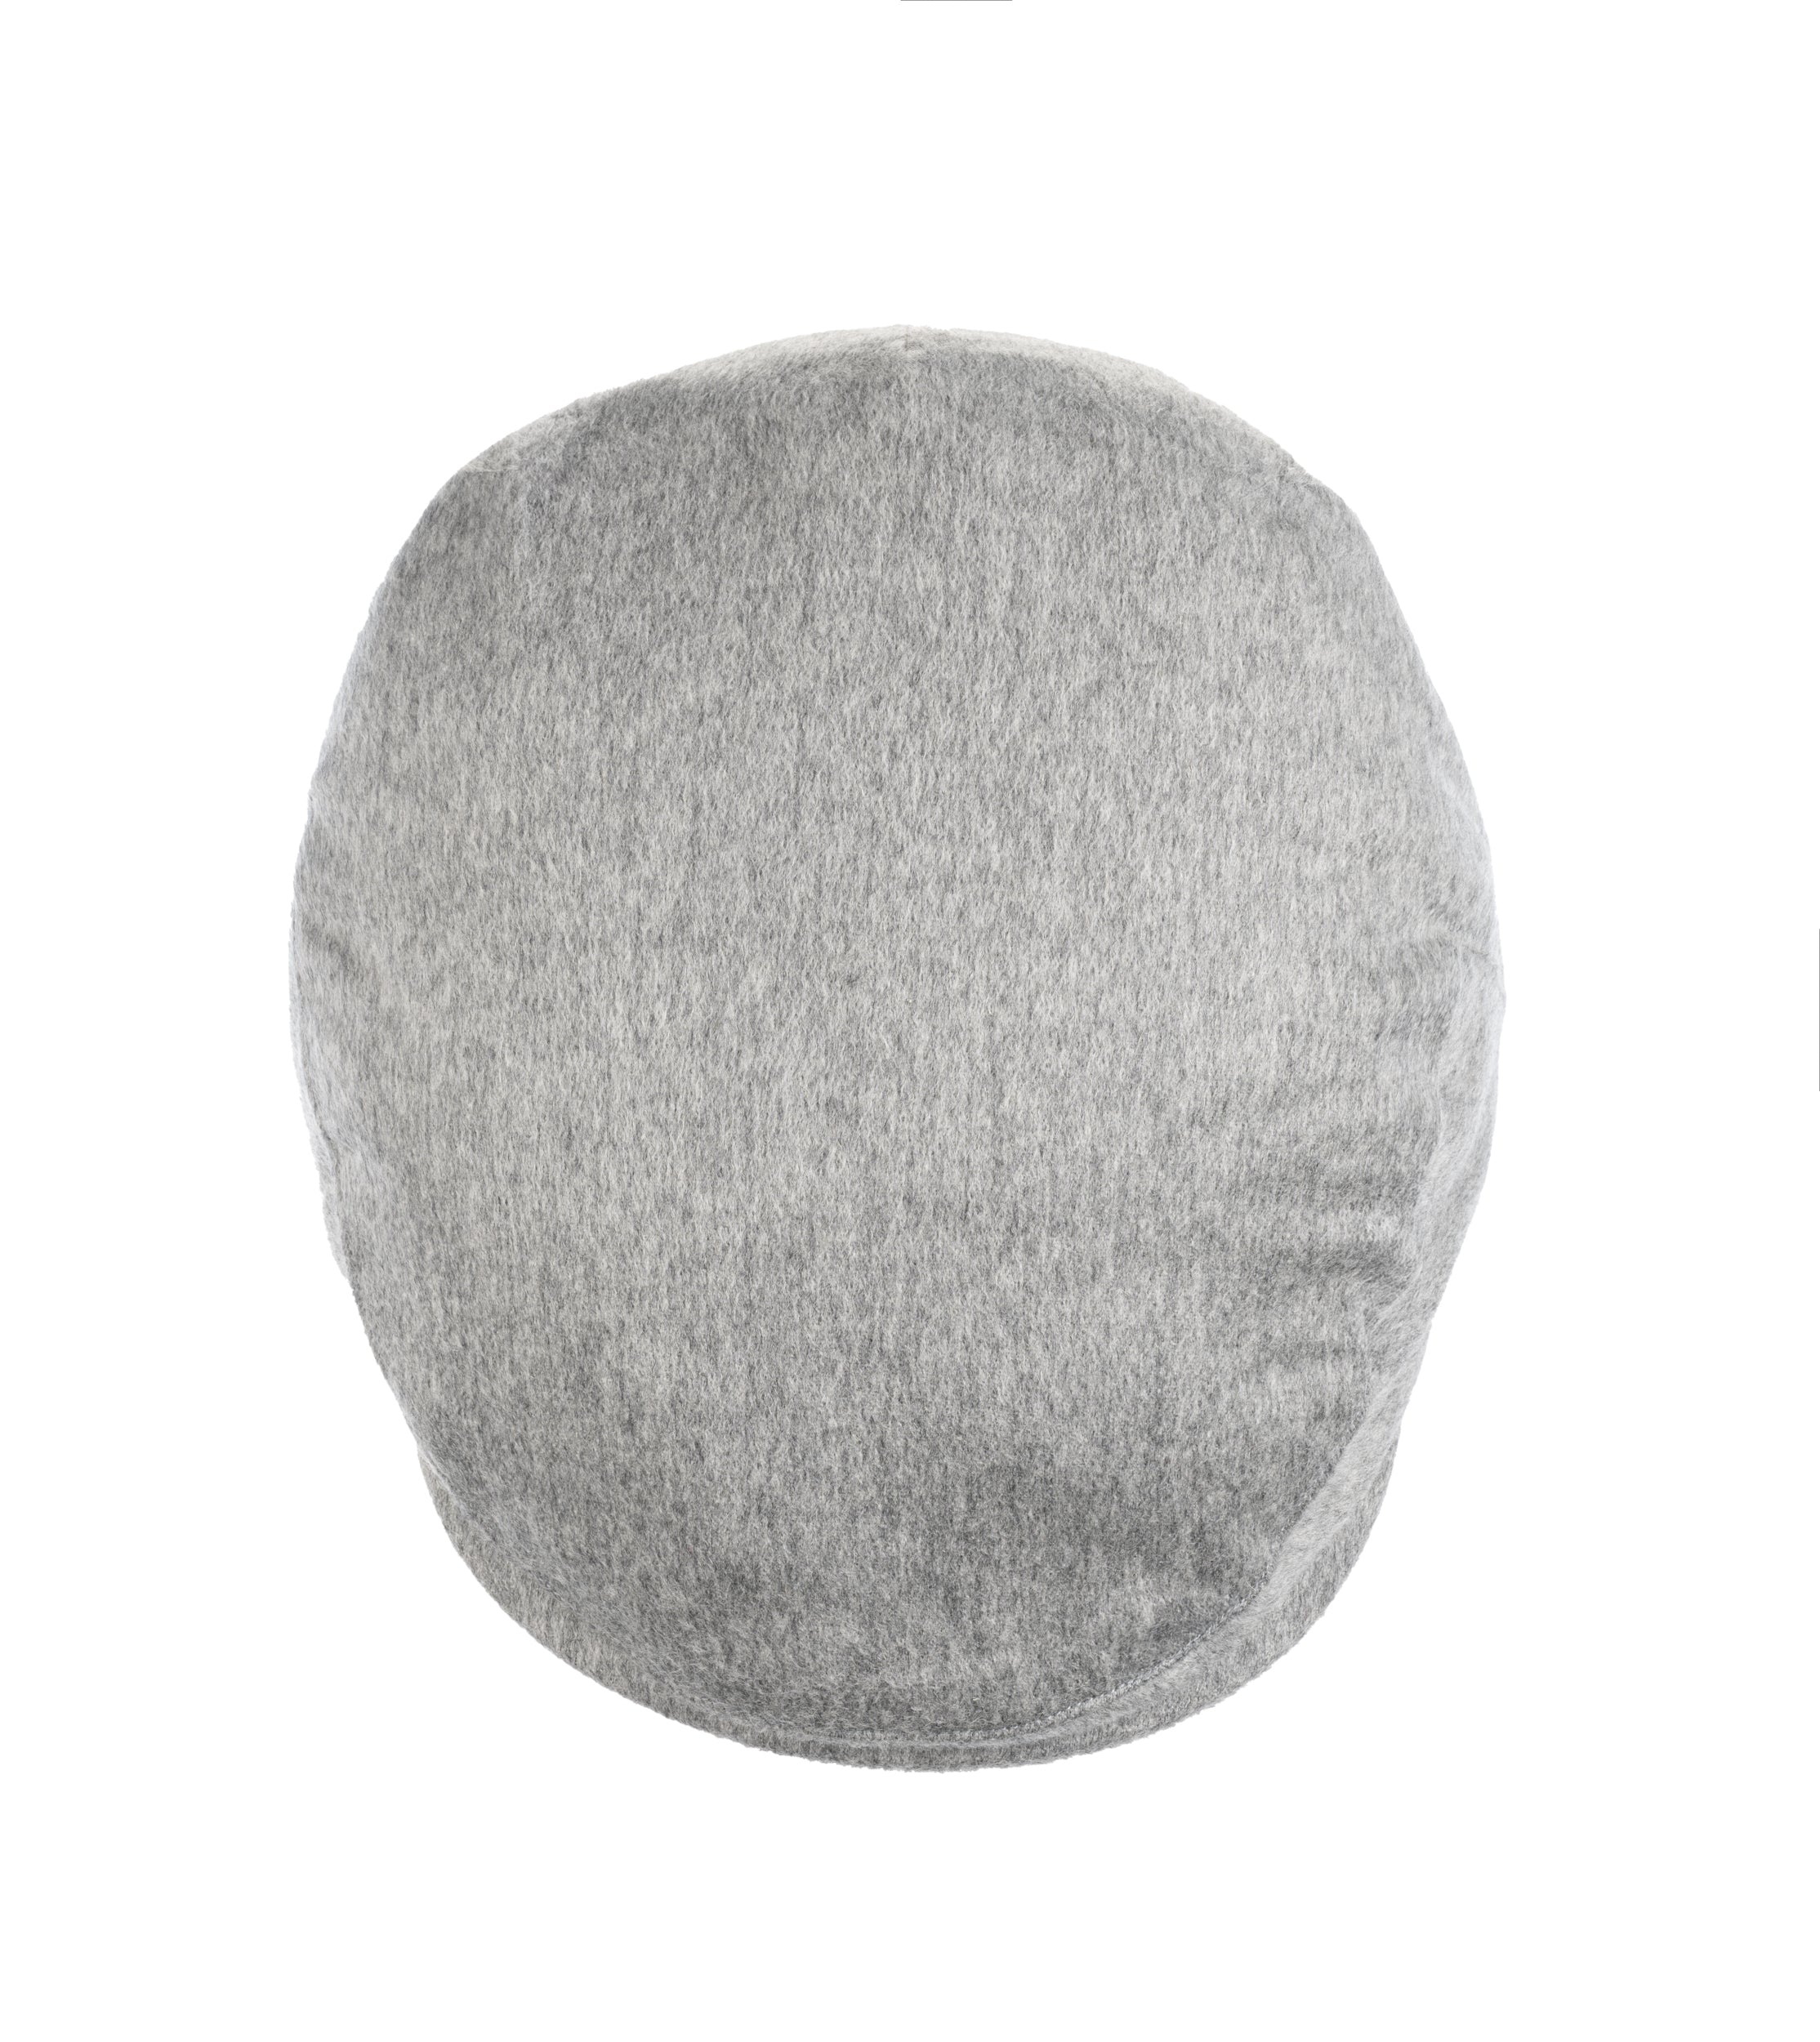 Christys' x Johnstons of Elgin Cashmere Made in England Balmoral Cap in Light Grey